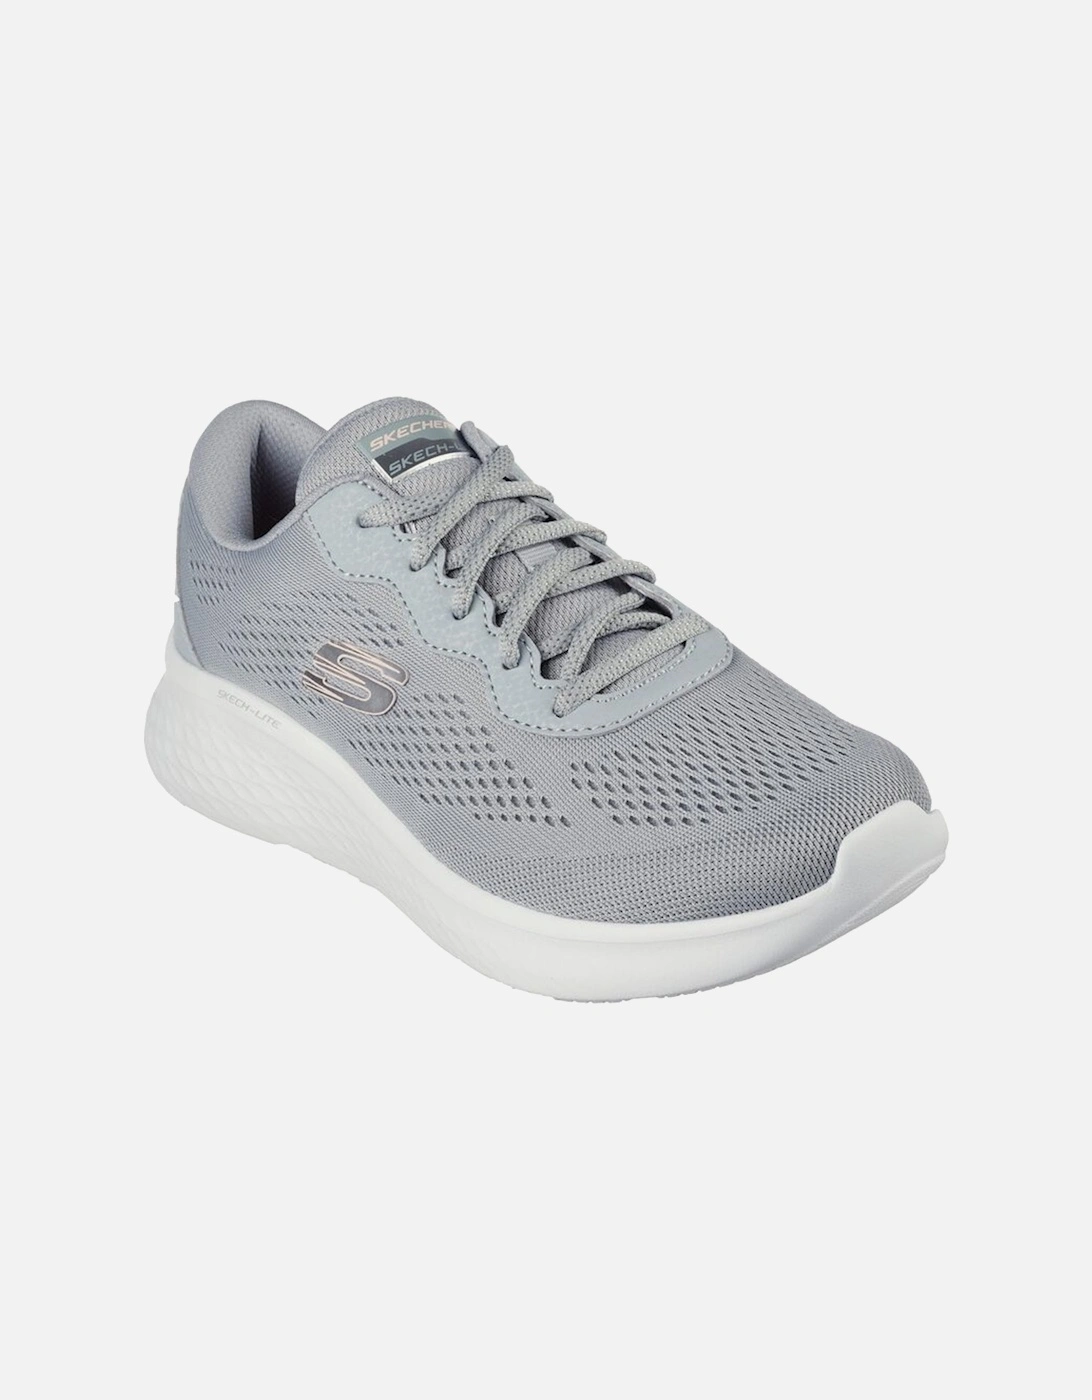 Skech-Lite Pro Perforated SS23, 9 of 8